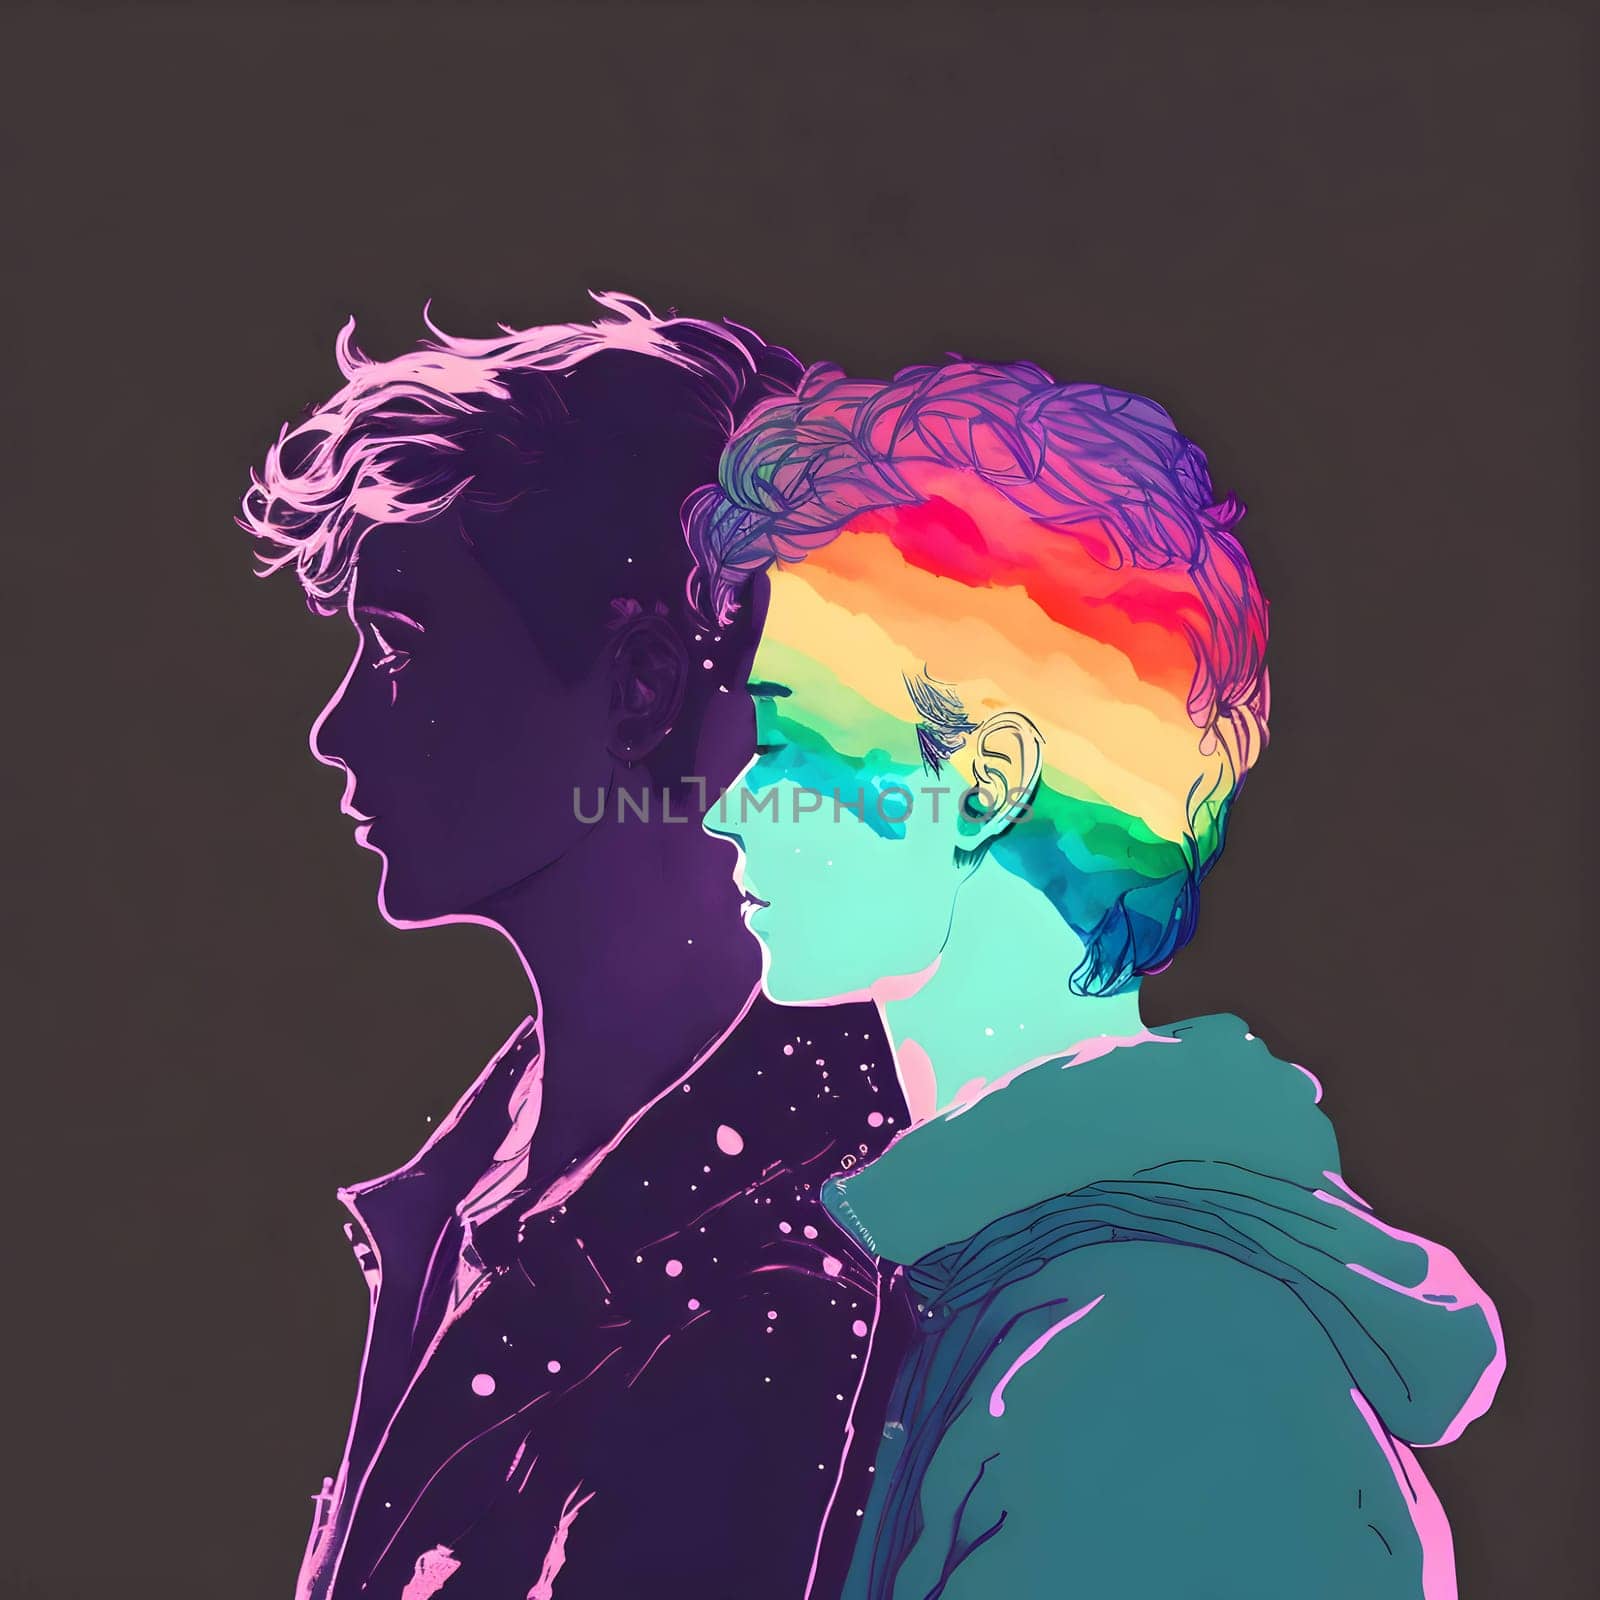 Silhouettes of two individuals in the vibrant LGBT rainbow colors against a serene gray background, celebrating inclusivity and diversity.